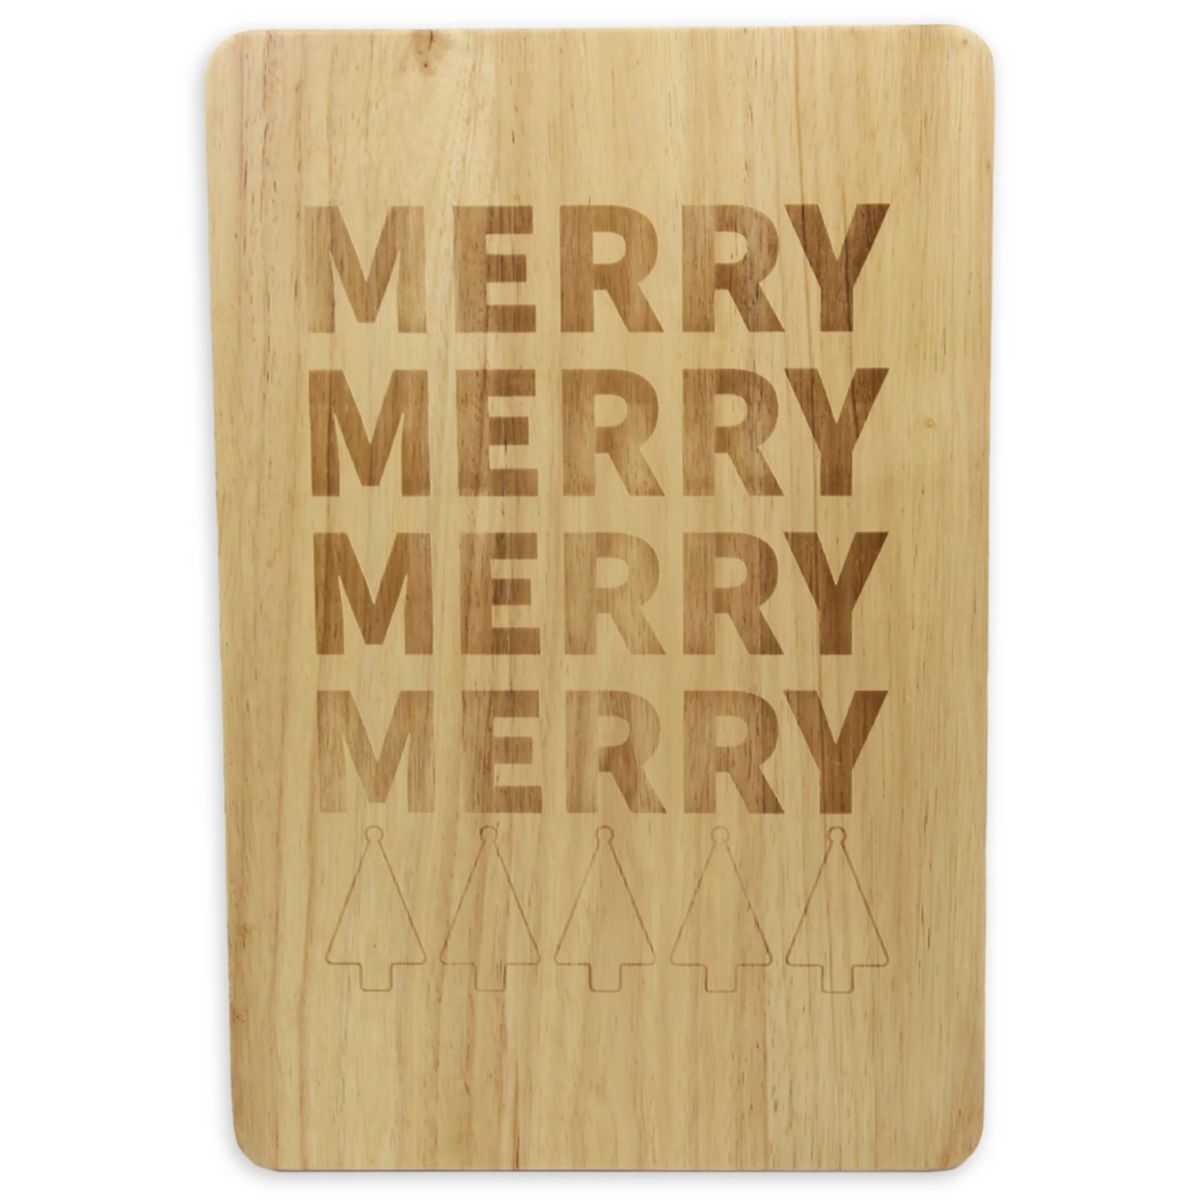 H for Happy 12inch by 18 inch wooden cutting board with the word Merry printed on it